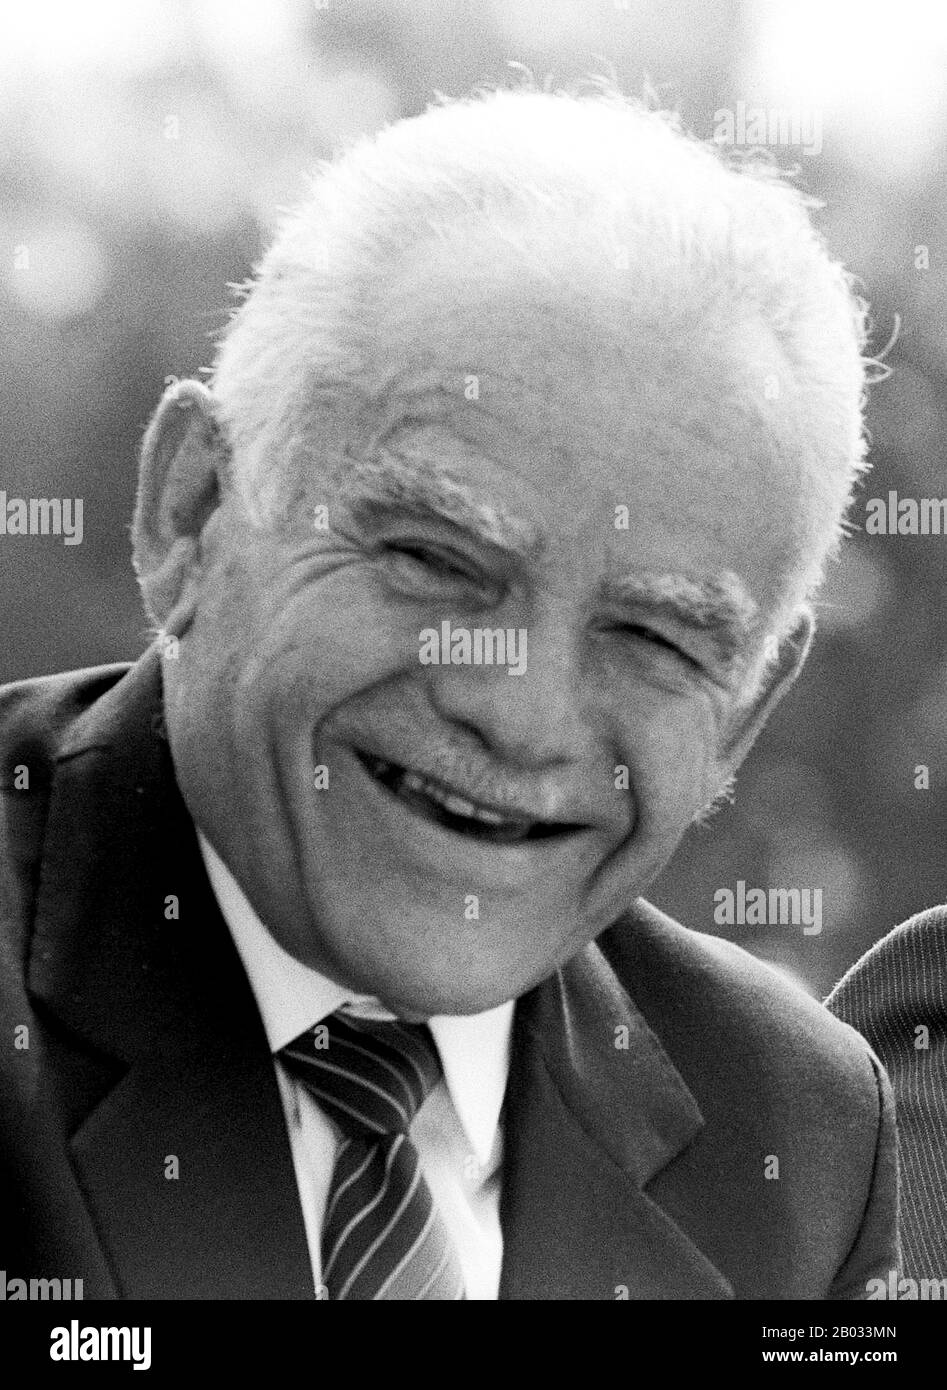 Israel / Palestine: Yitzhak Shamir (1915-2012), 7th Prime Minister of Israel, Jerusalem, 1988. Photo from Government Press Office (Israel).  Yitzhak Shamir was an Israeli politician and the seventh Prime Minister of Israel, serving two terms, 1983–84 and 1986–1992. Before the establishment of the State of Israel, Shamir was a leader of the Zionist terrorist group Lehi (the Stern Gang).  As a leader of the Stern Gang, Shamir both authorised and helped organise the assassination of  the United Nations Mediator in Palestine Swedish Count Folke Bernadotte in September, 1948. Stock Photo